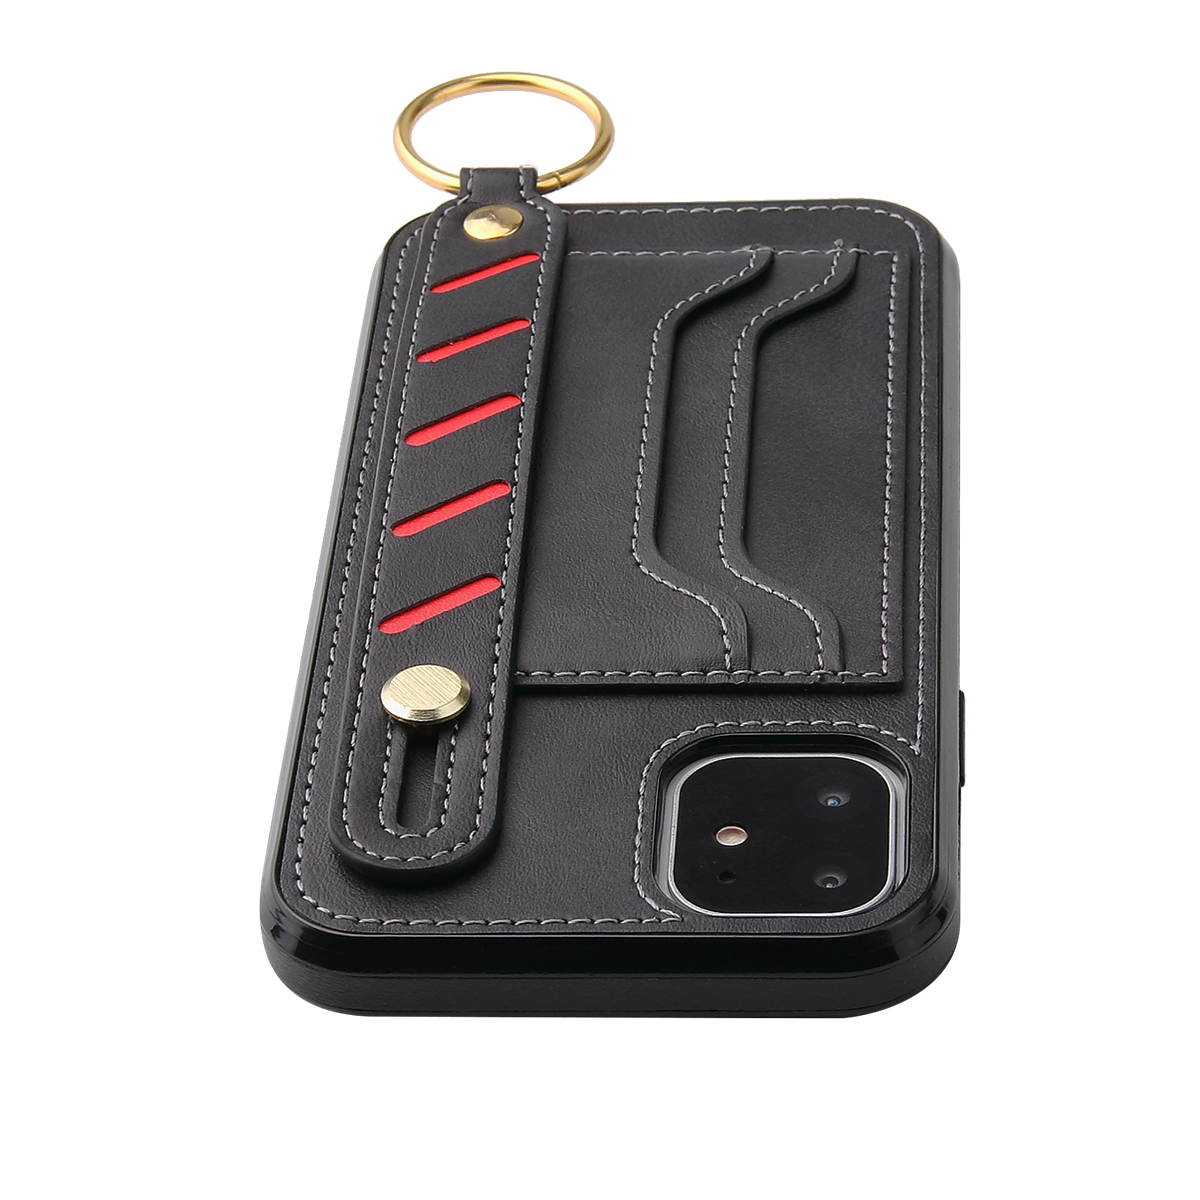 HR Wireless for Apple iPhone 14 Pro 6.1 Multi-functional Cards Slot Wrist Strap Vegan Leather Case Cover - Black